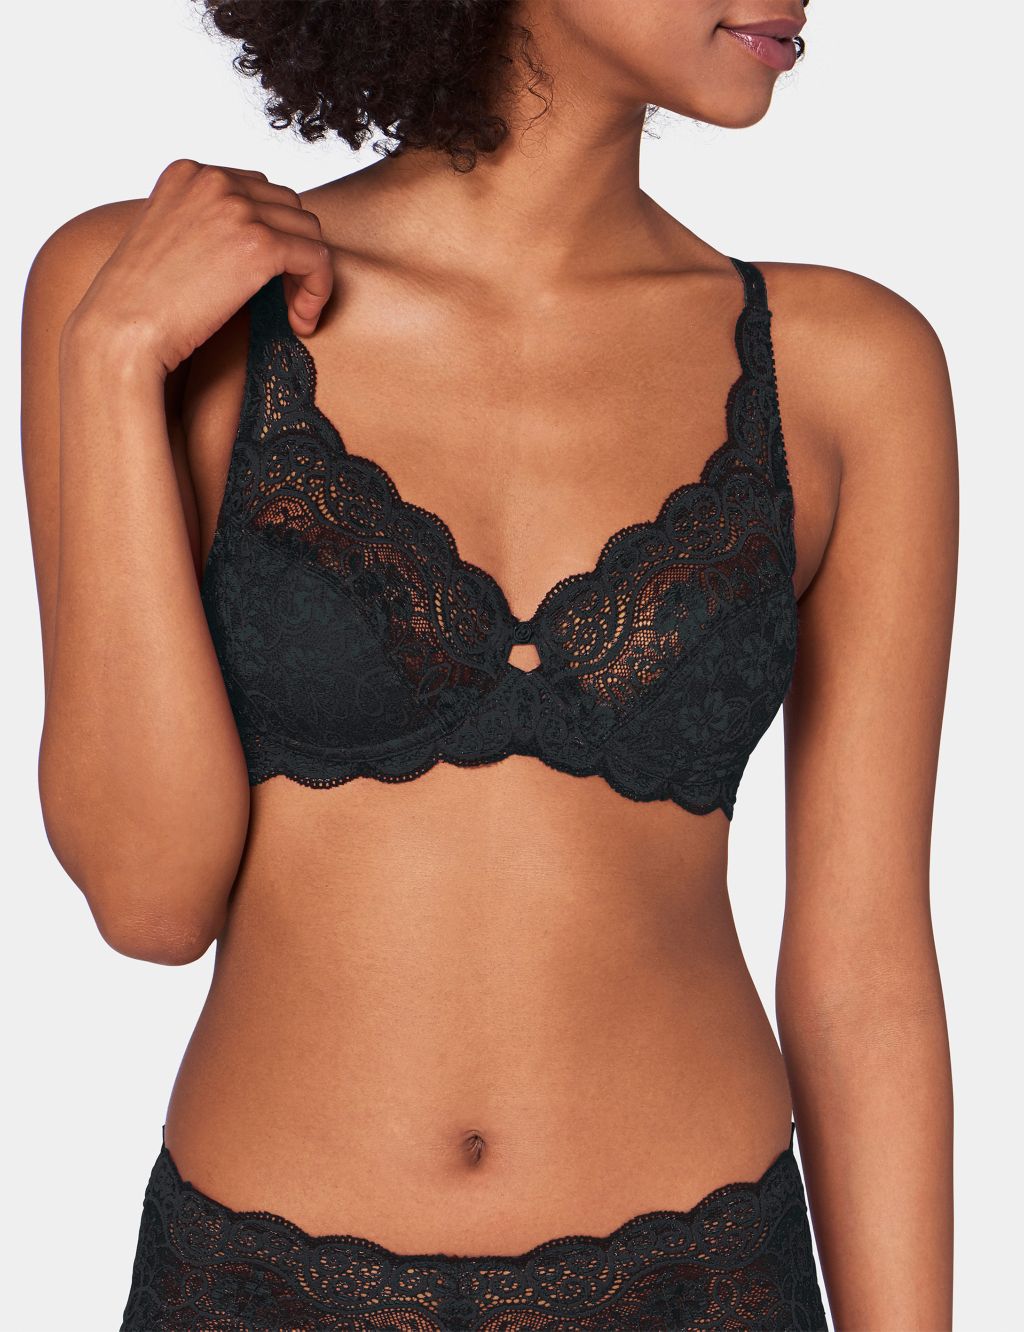 Amourette 300 Lace Underwired Full Cup Bra B-G image 3